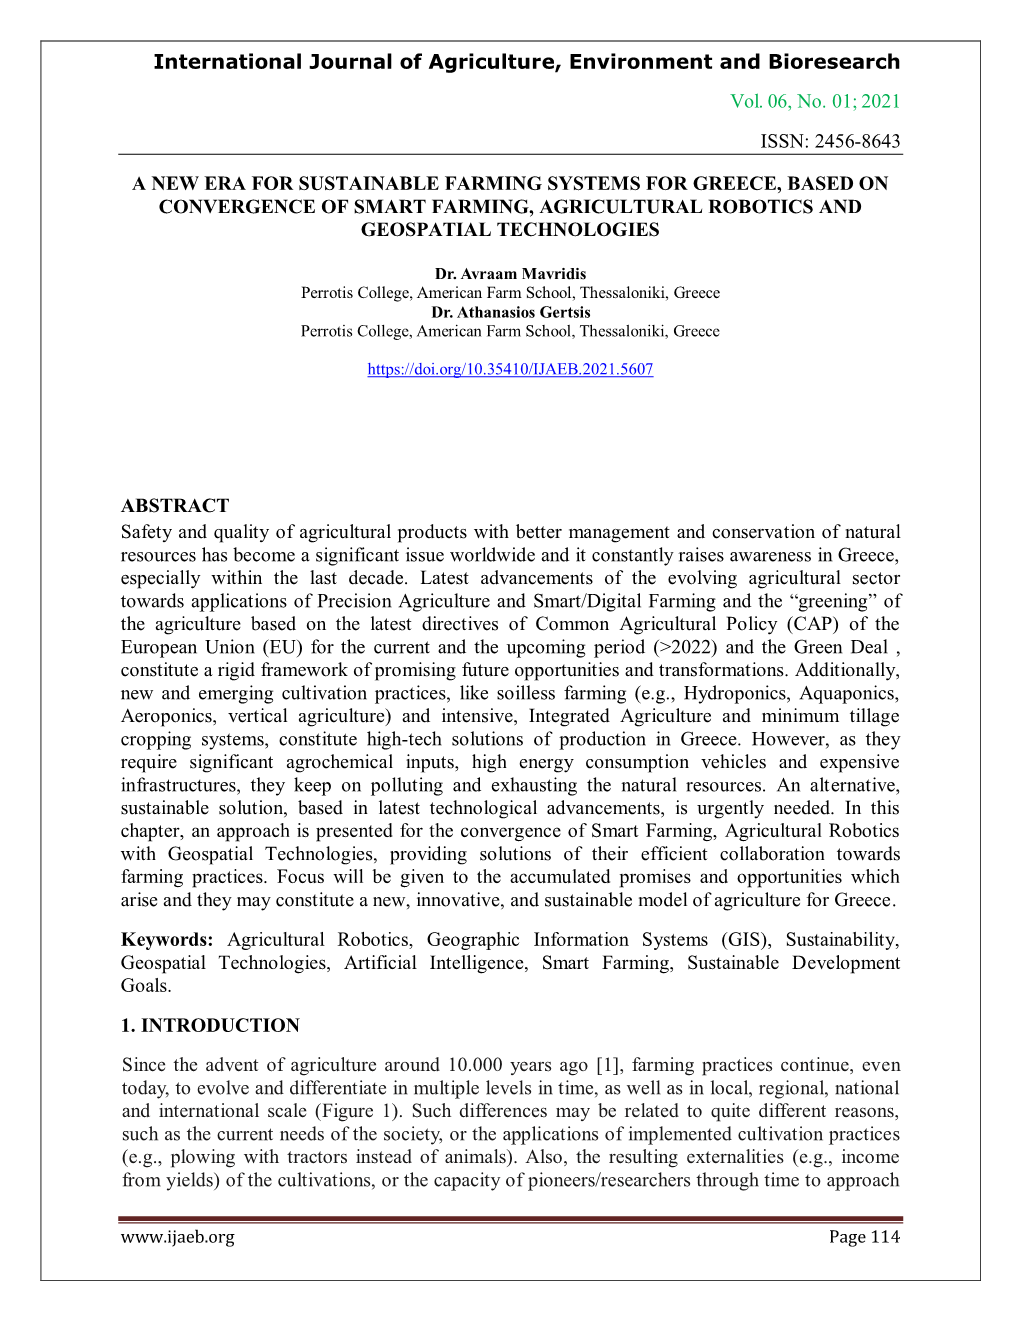 International Journal of Agriculture, Environment and Bioresearch Vol